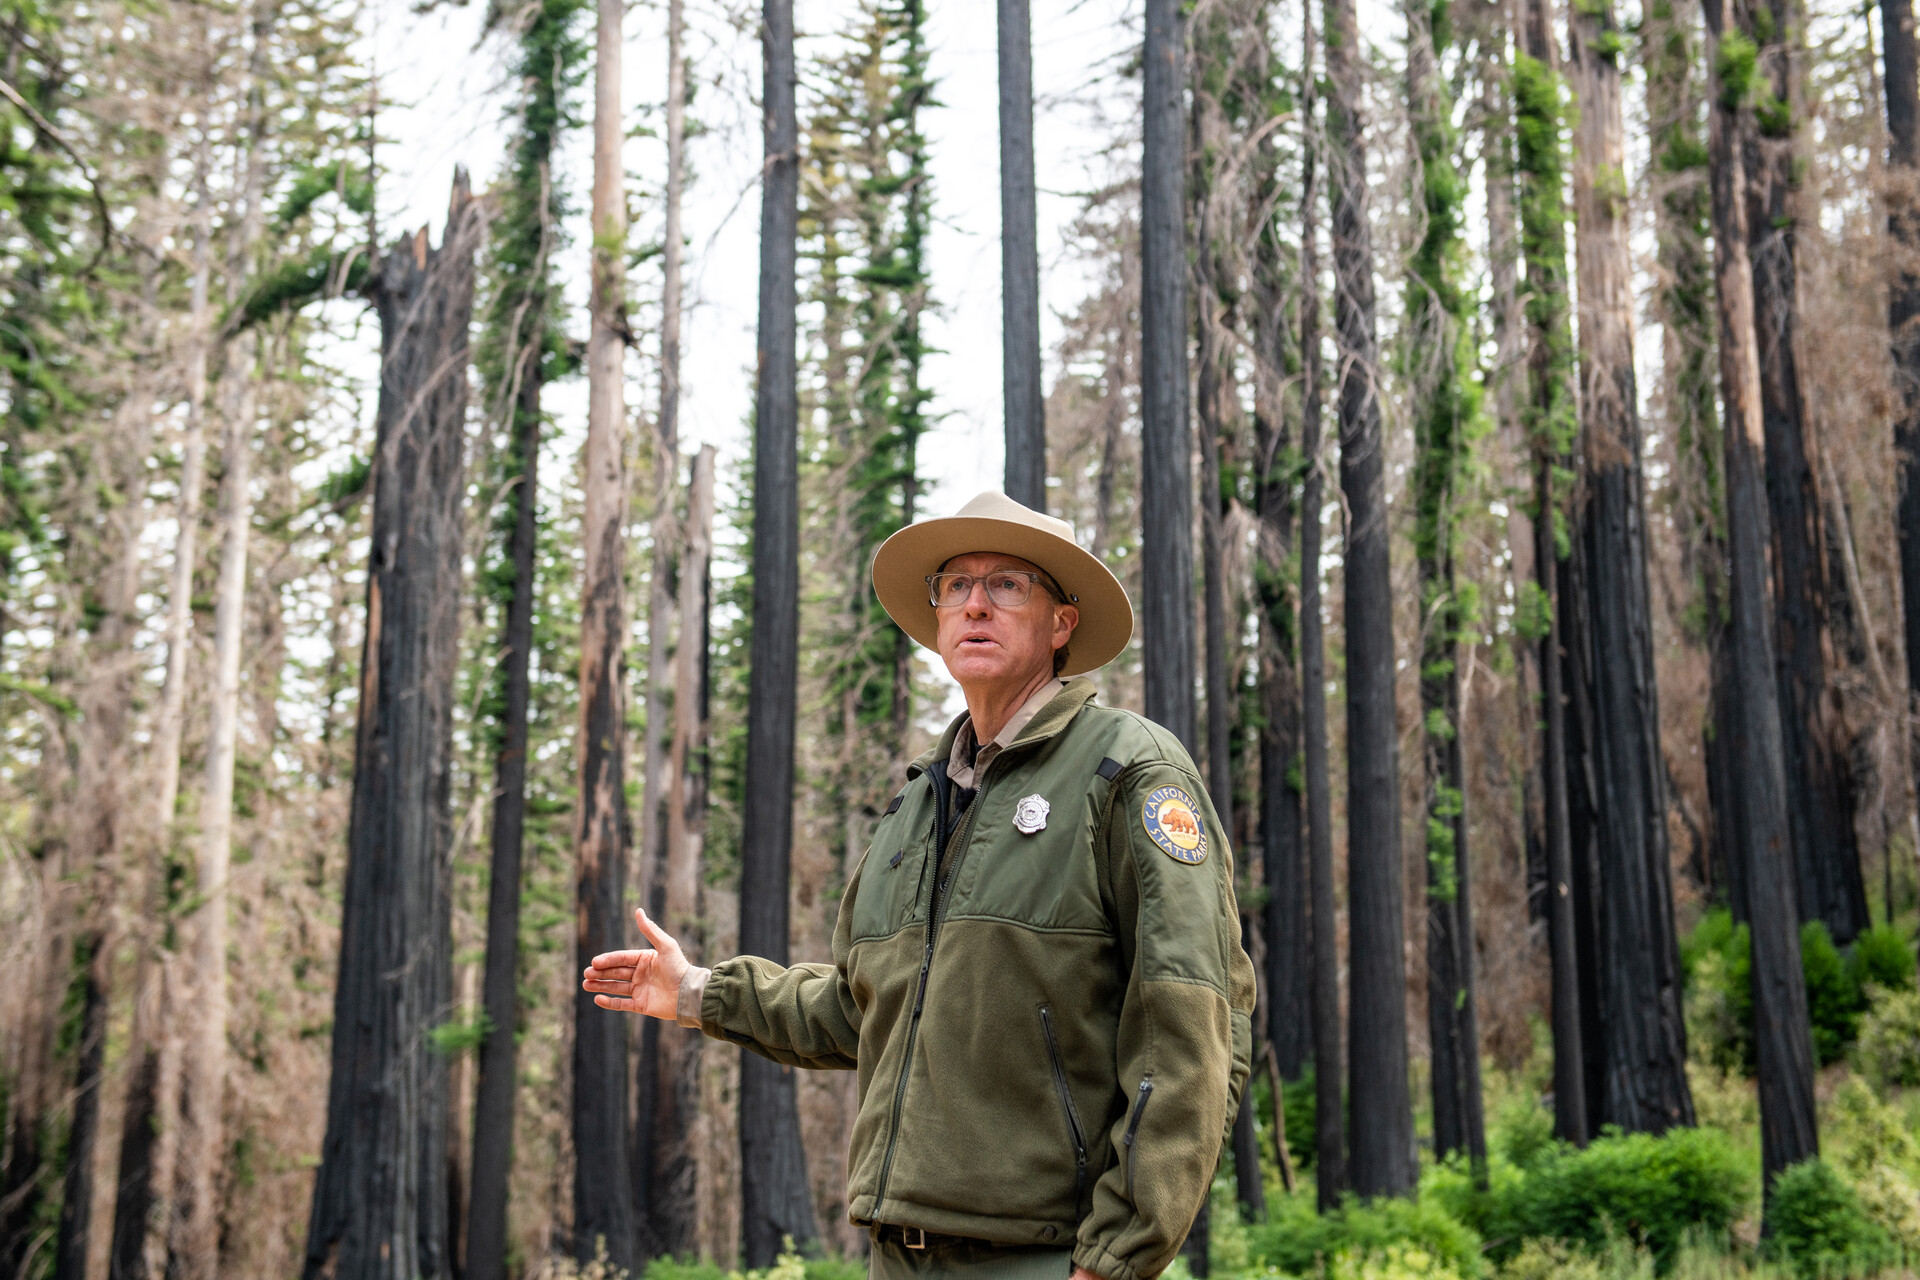 Chris Spohrer, an older man who presents as white, stands in front of fire-blackened redwoods that have much green foliage growing off them. He is wearing a California State Parks uniform of a green jacket with California state seal on the arm, and a wide-brimmed yellow hat.